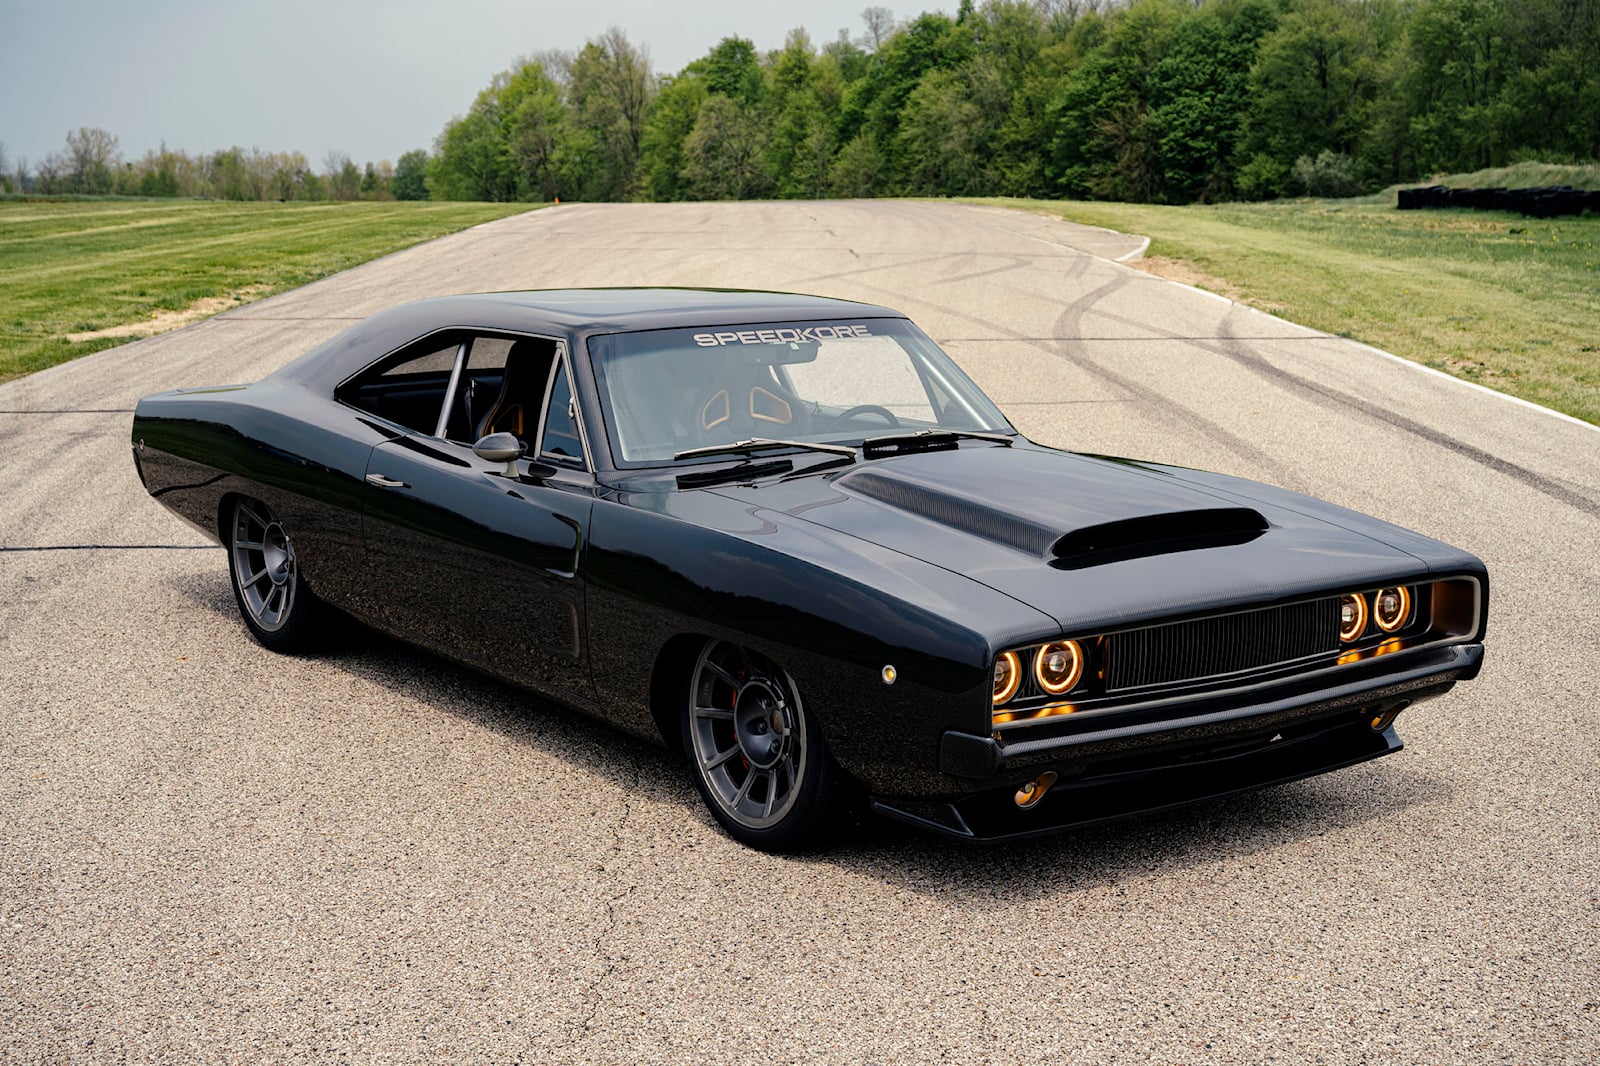 This 1000-HP Dodge Charger Was Built For A Special Employee